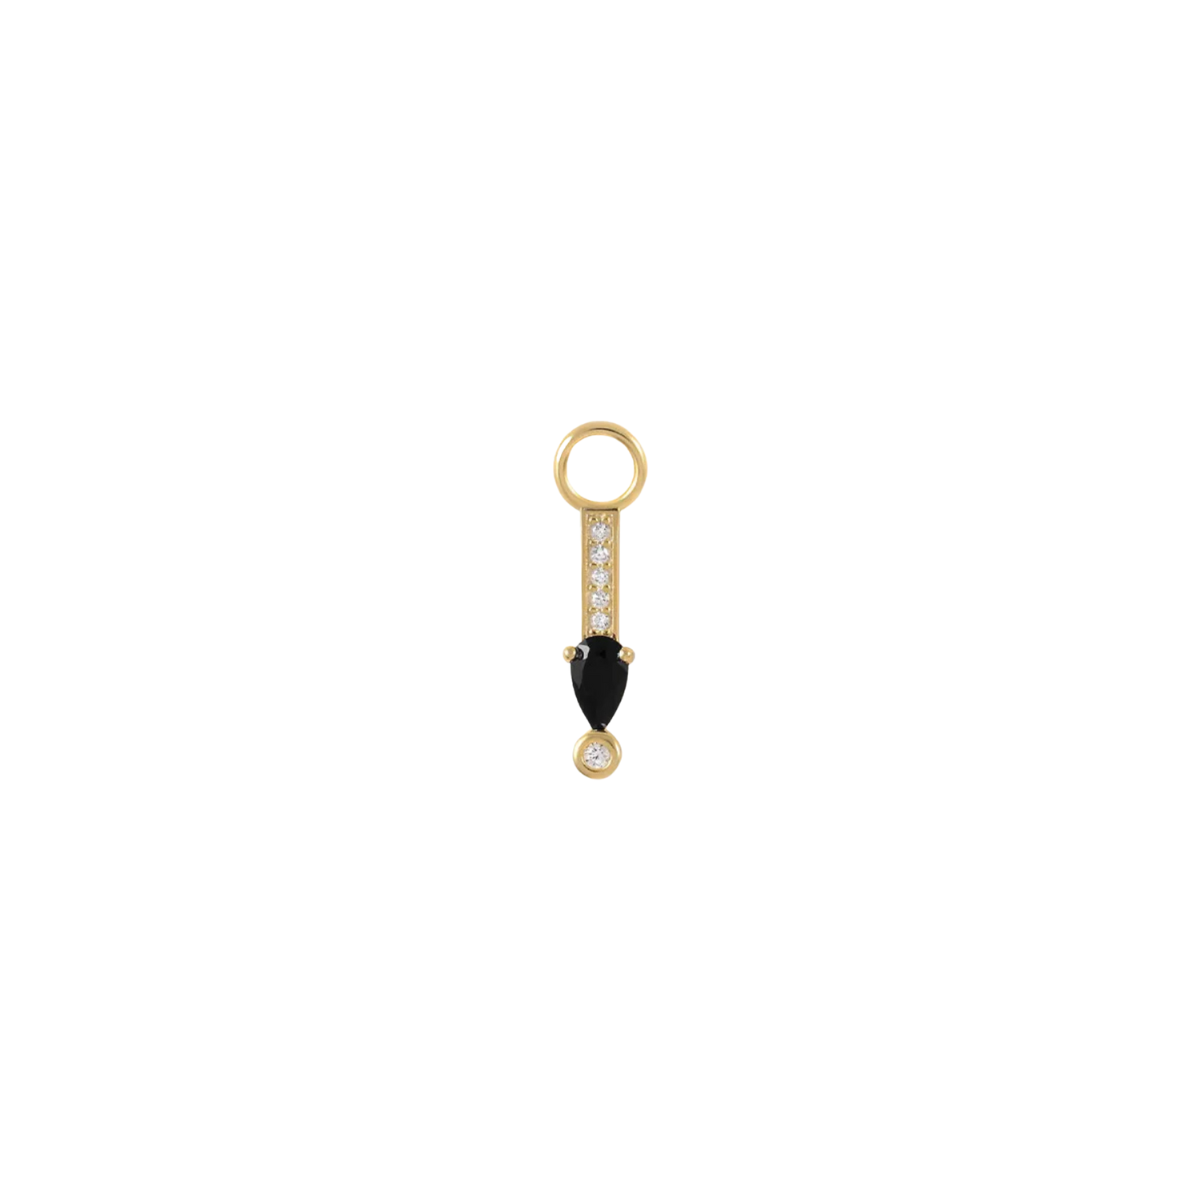 Loxley 18k Gold Plated Earring Charm